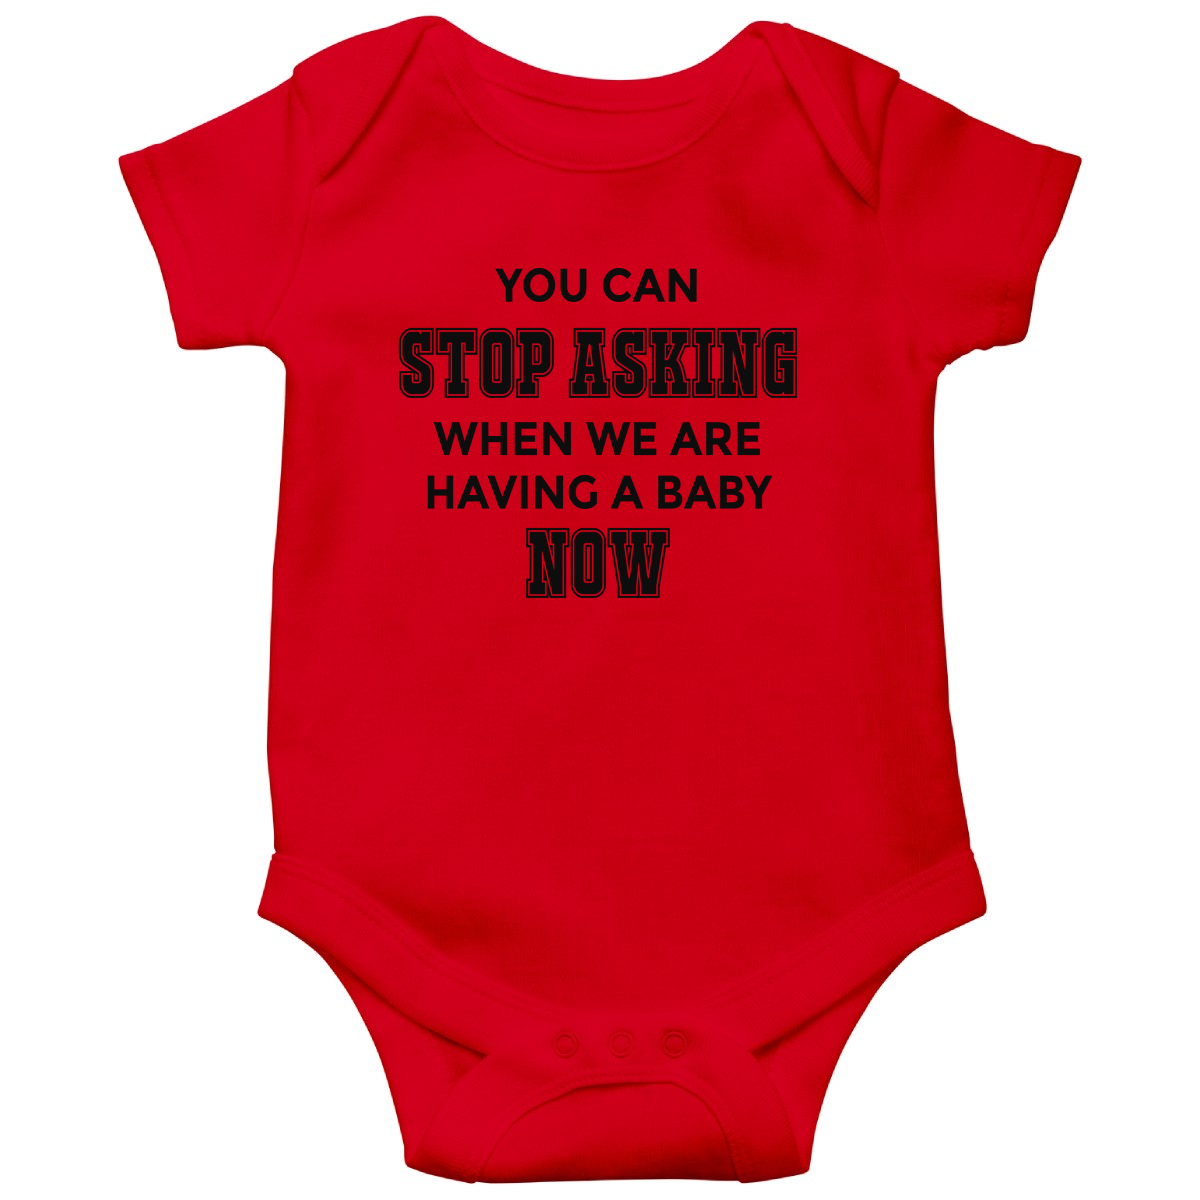 You can stop asking when we are having baby NOW Baby Bodysuits | Red